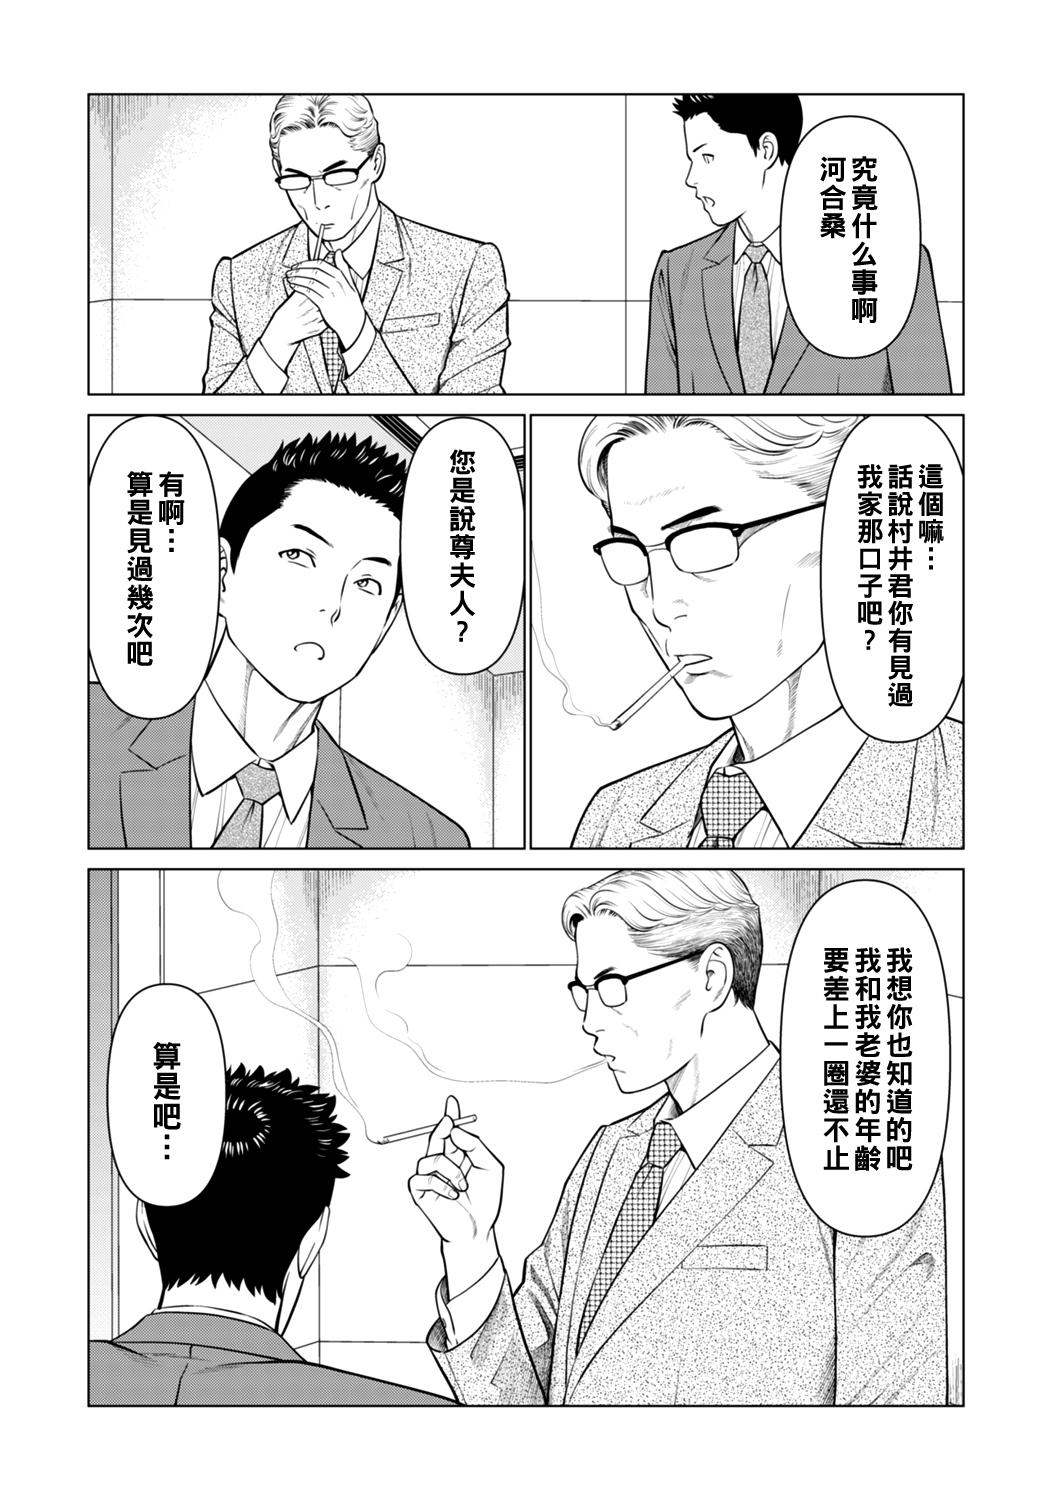 Spanish 誘い 第一話（Chinese） Eating - Page 3